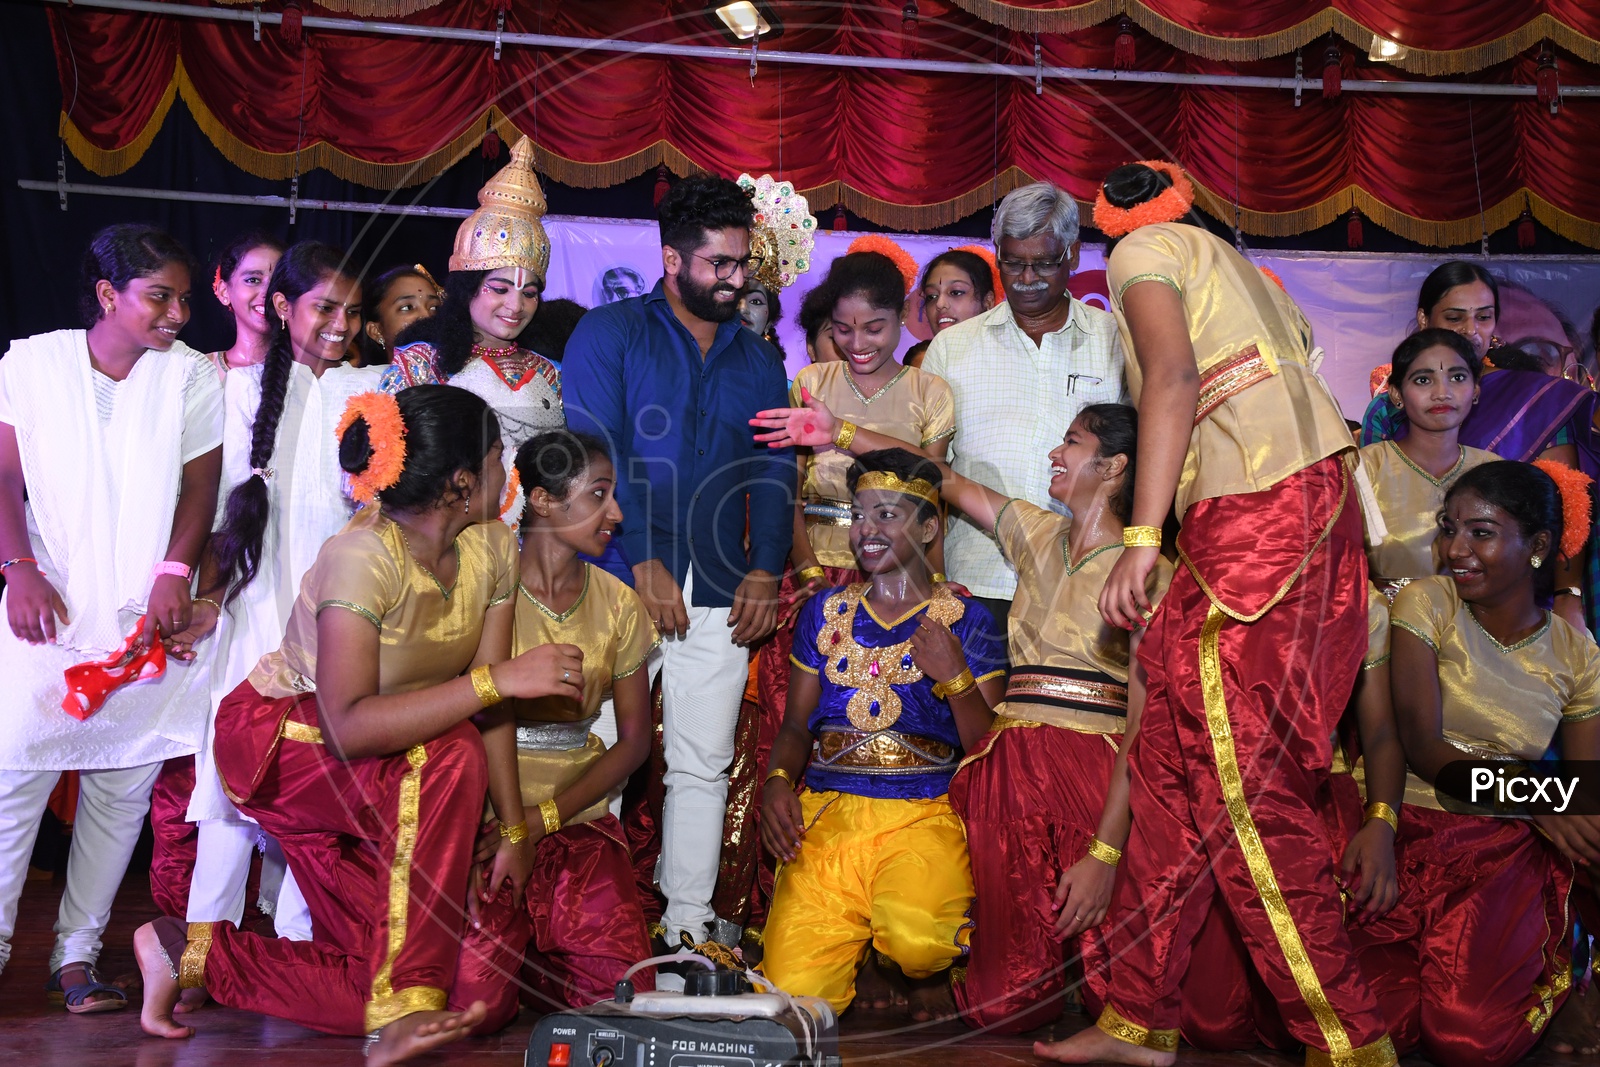 Choreography Master Sekhar taking a group picture with the performers